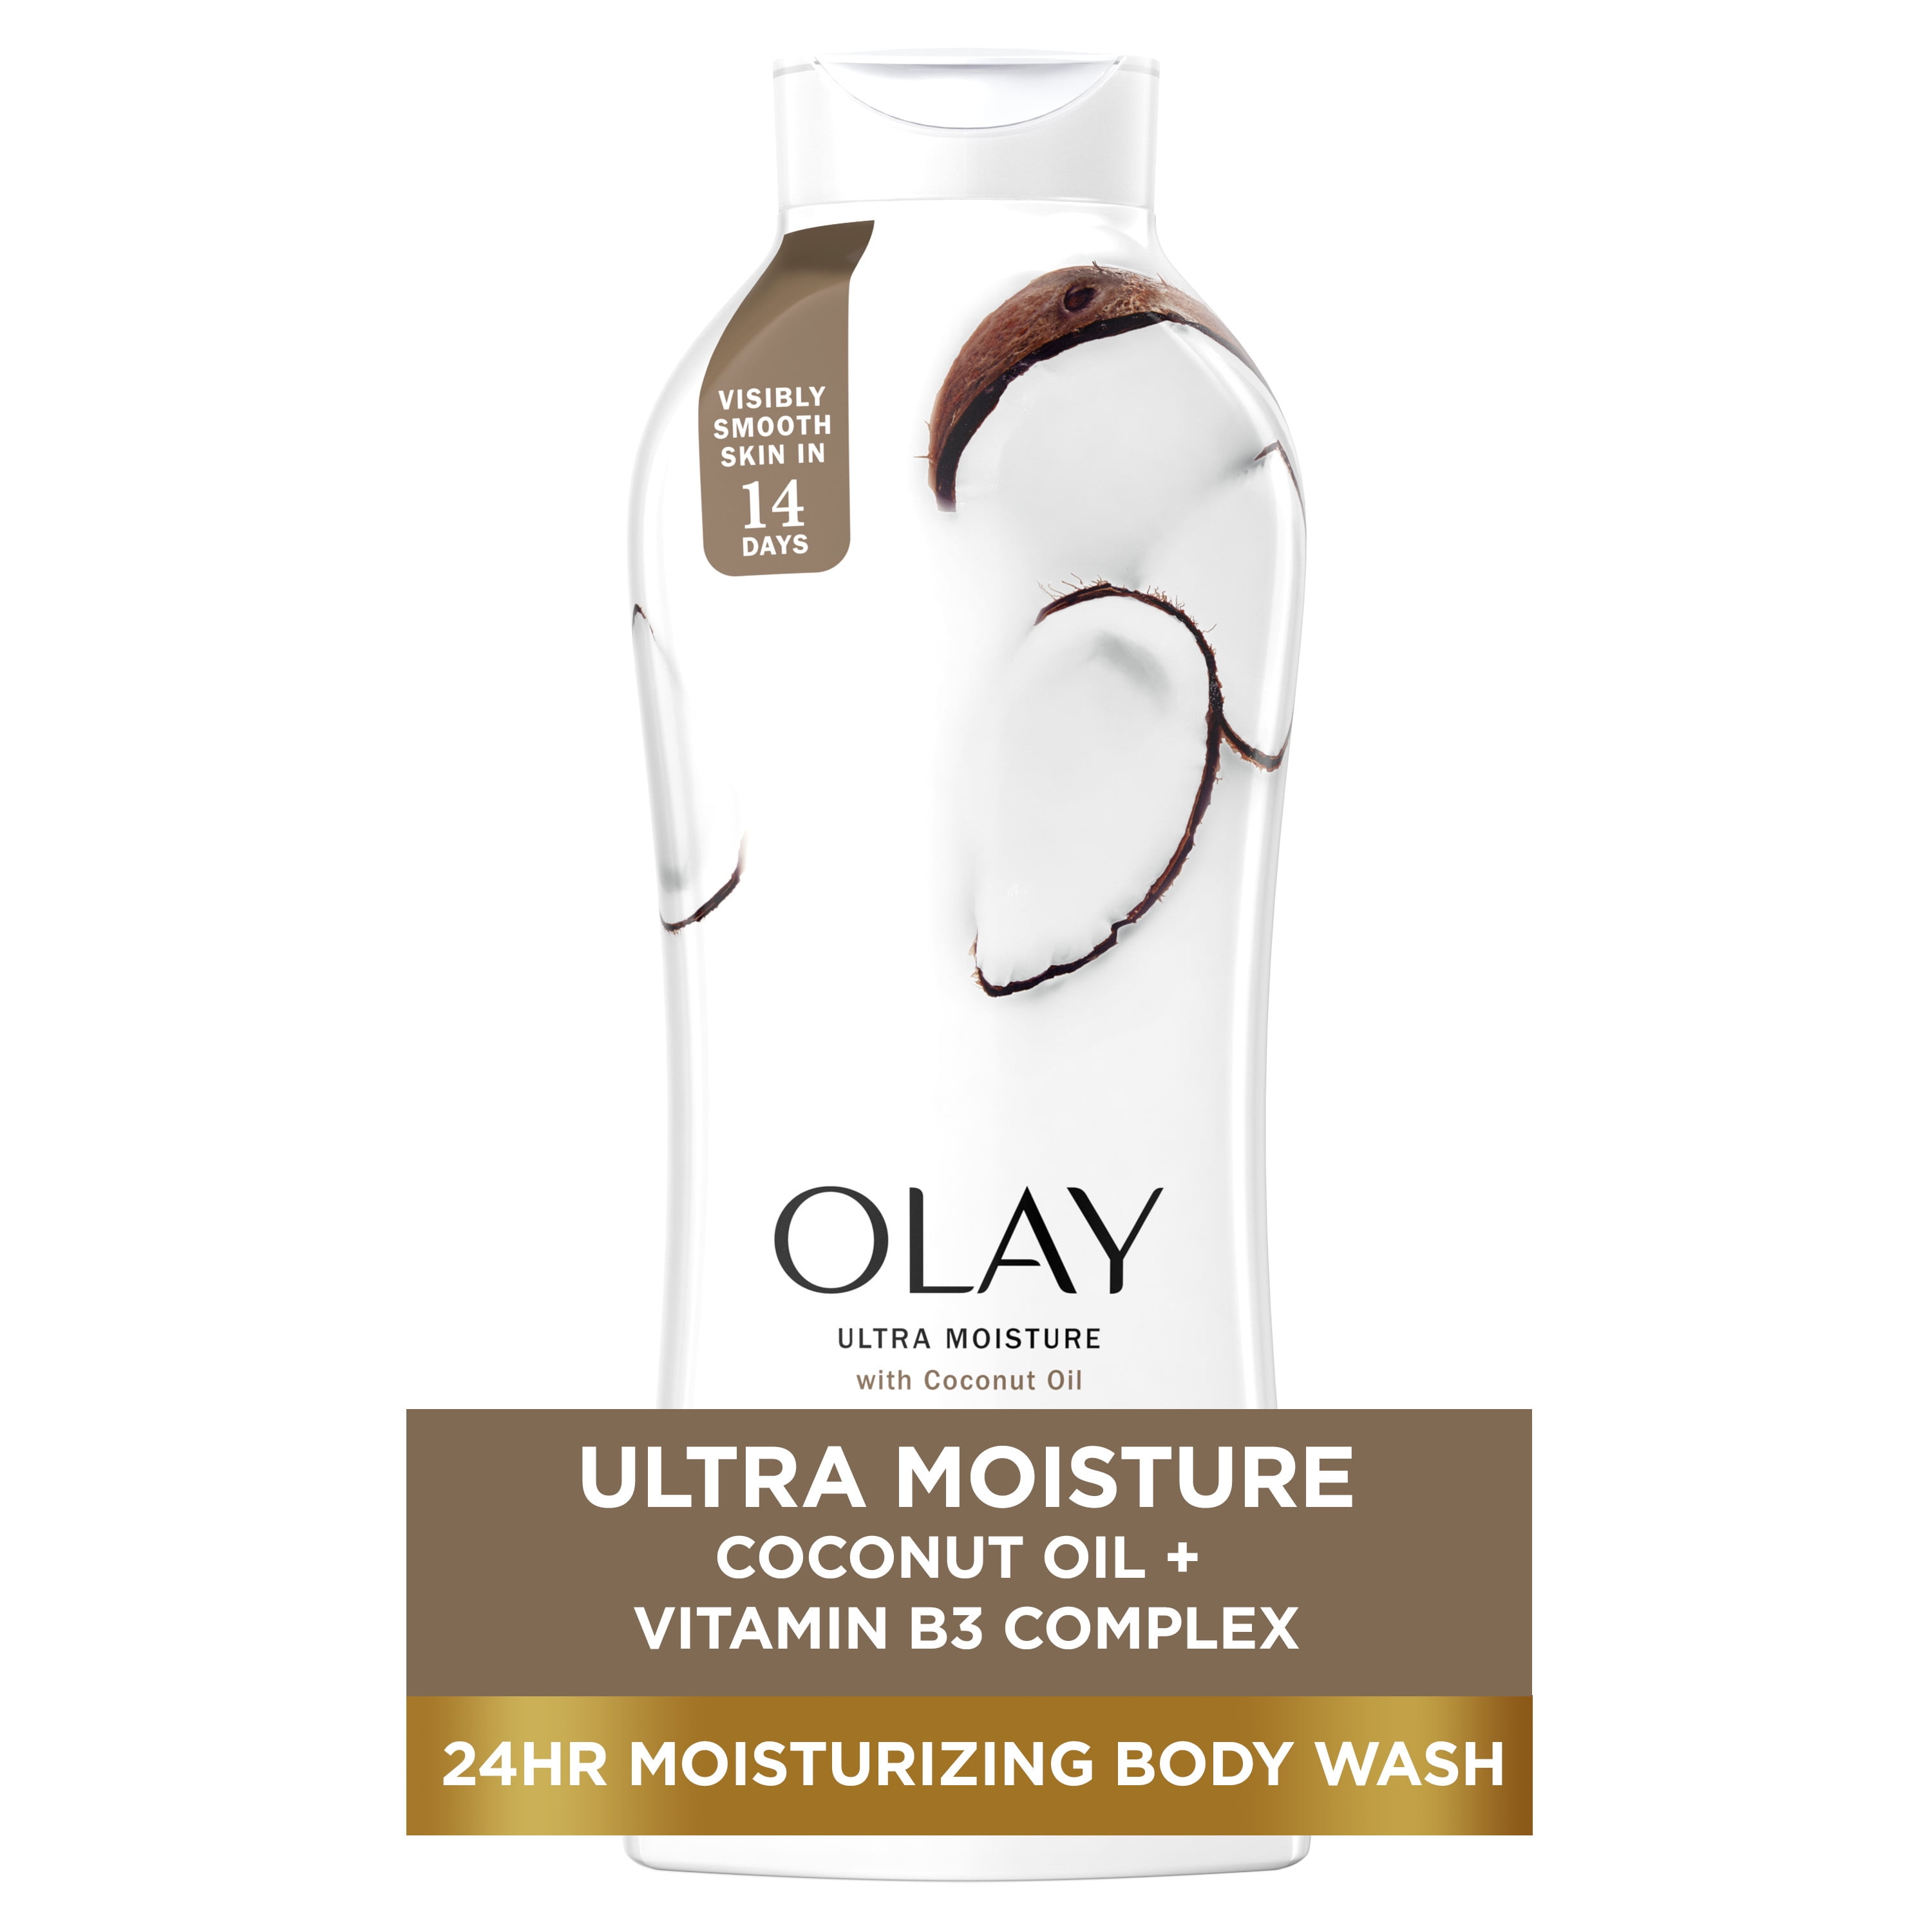 22-Oz Olay Ultra Moisture Body Wash with Coconut Oil + $5 Walmart Cash $6.45 + Free Store Pickup at Walmart or+ Free S&H w/ Walmart+ or $35+